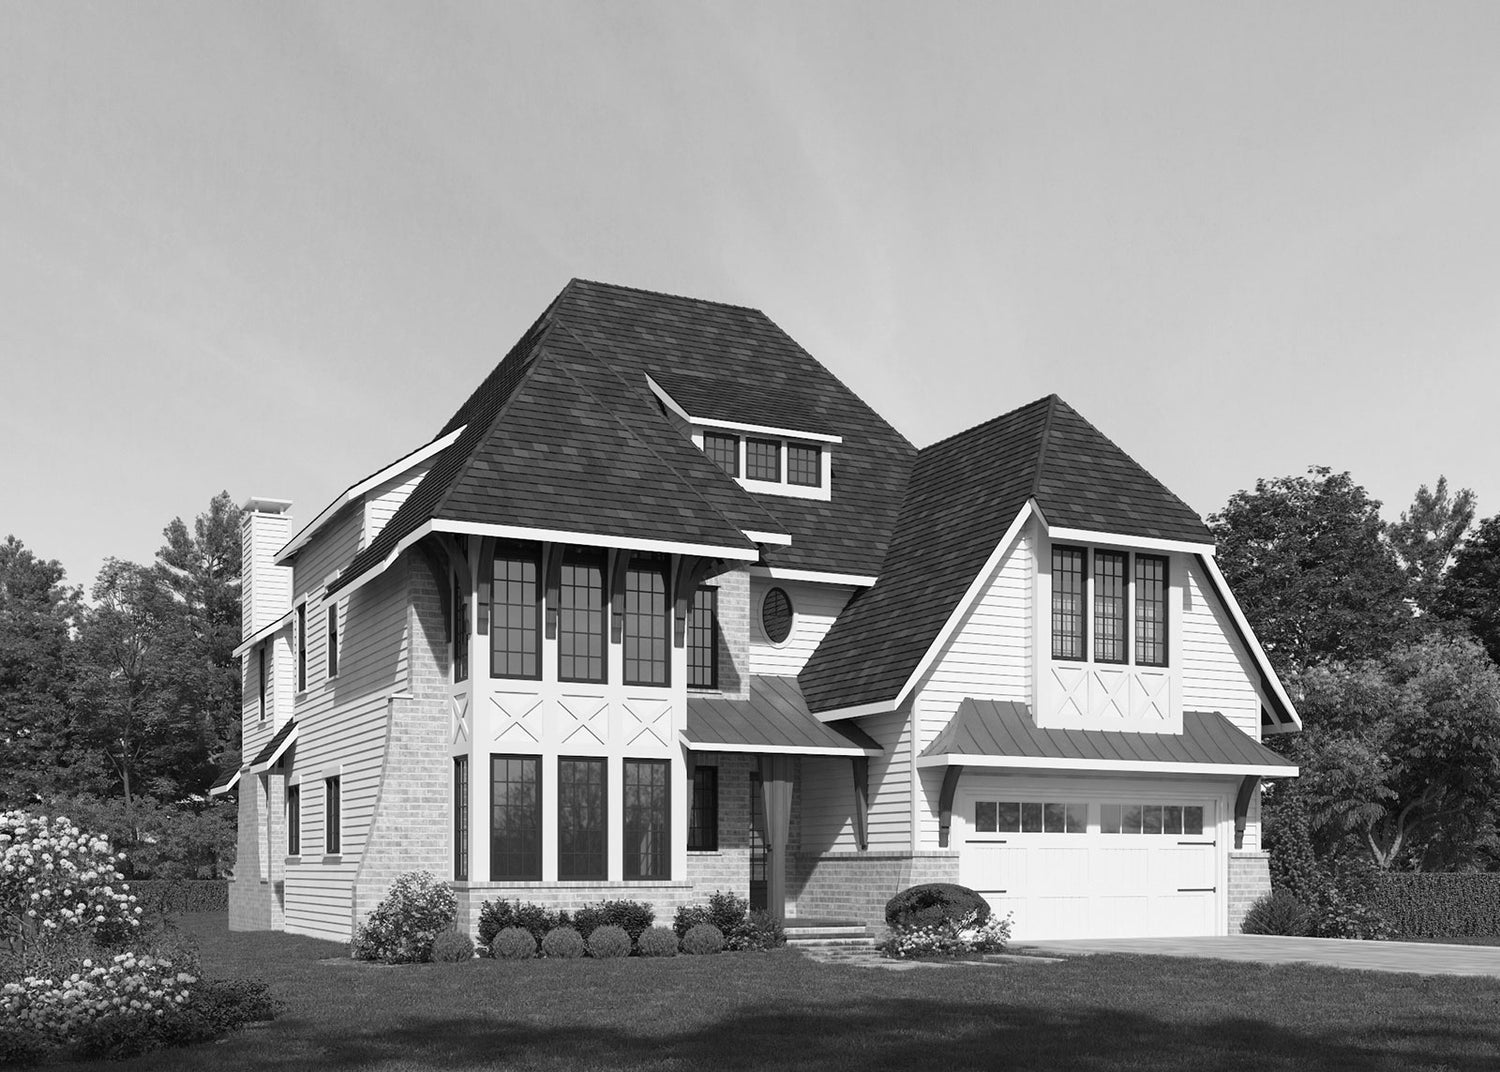 Chase Front Elevation Rendering